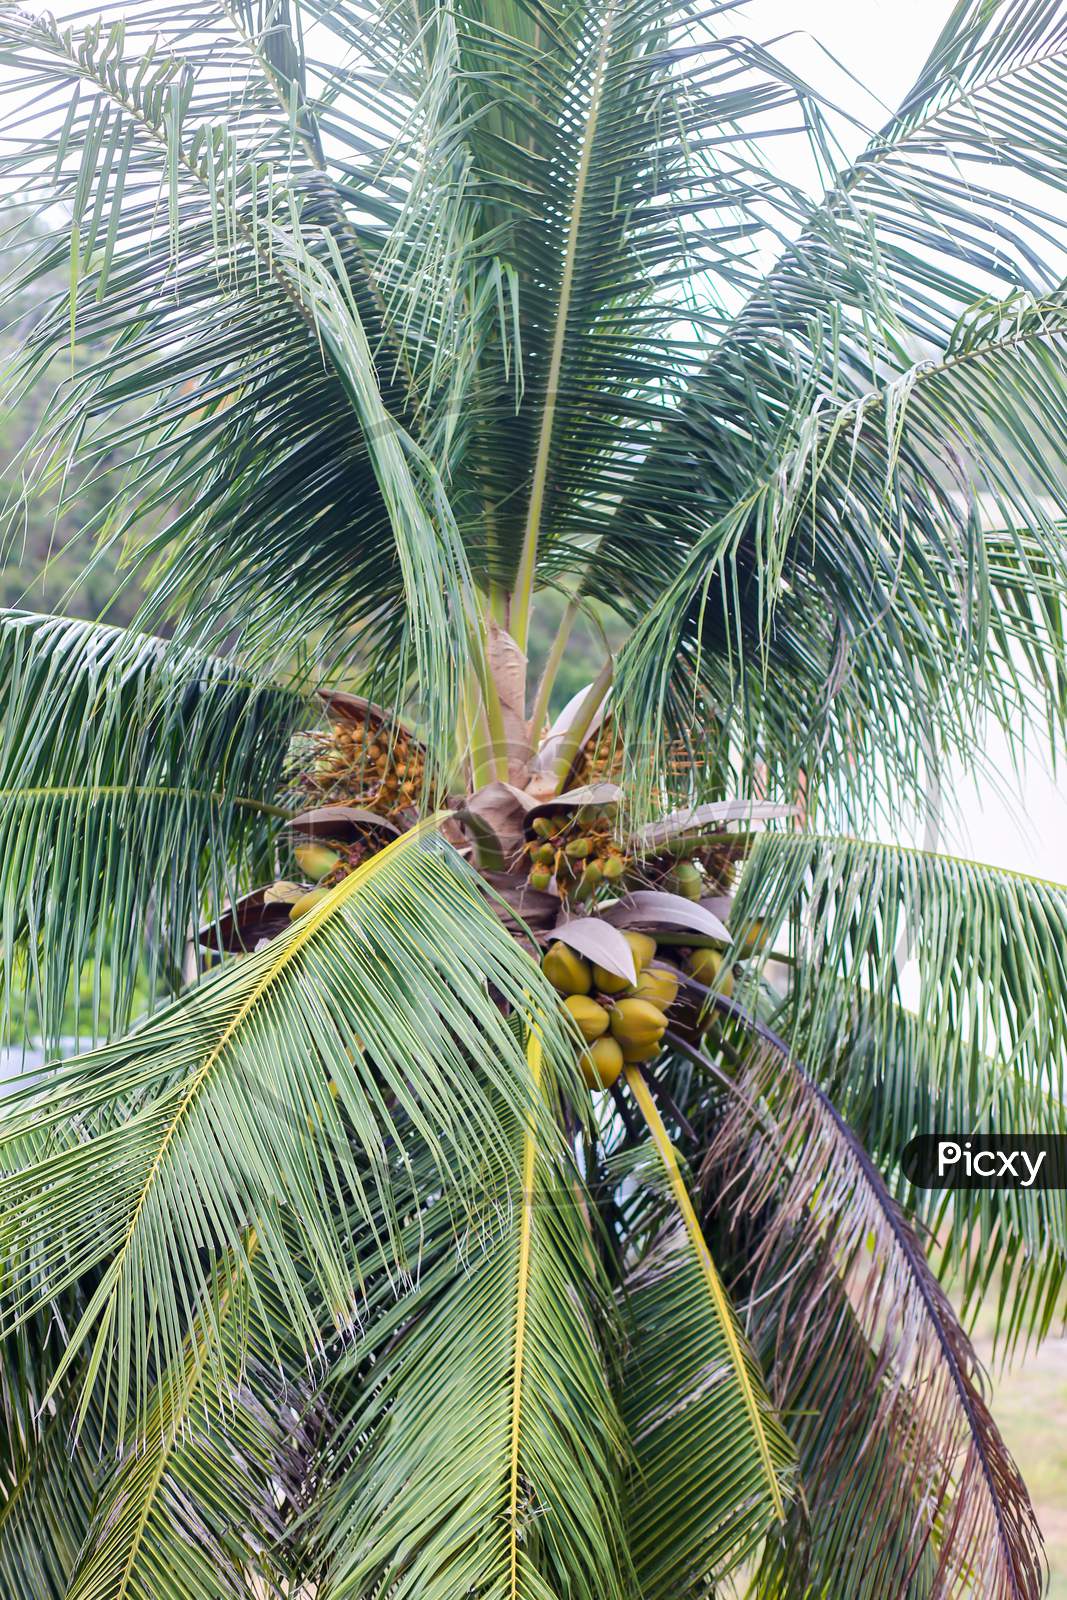 Fresh Coconut On The Tree, Coconut Cluster On Coconut Tree